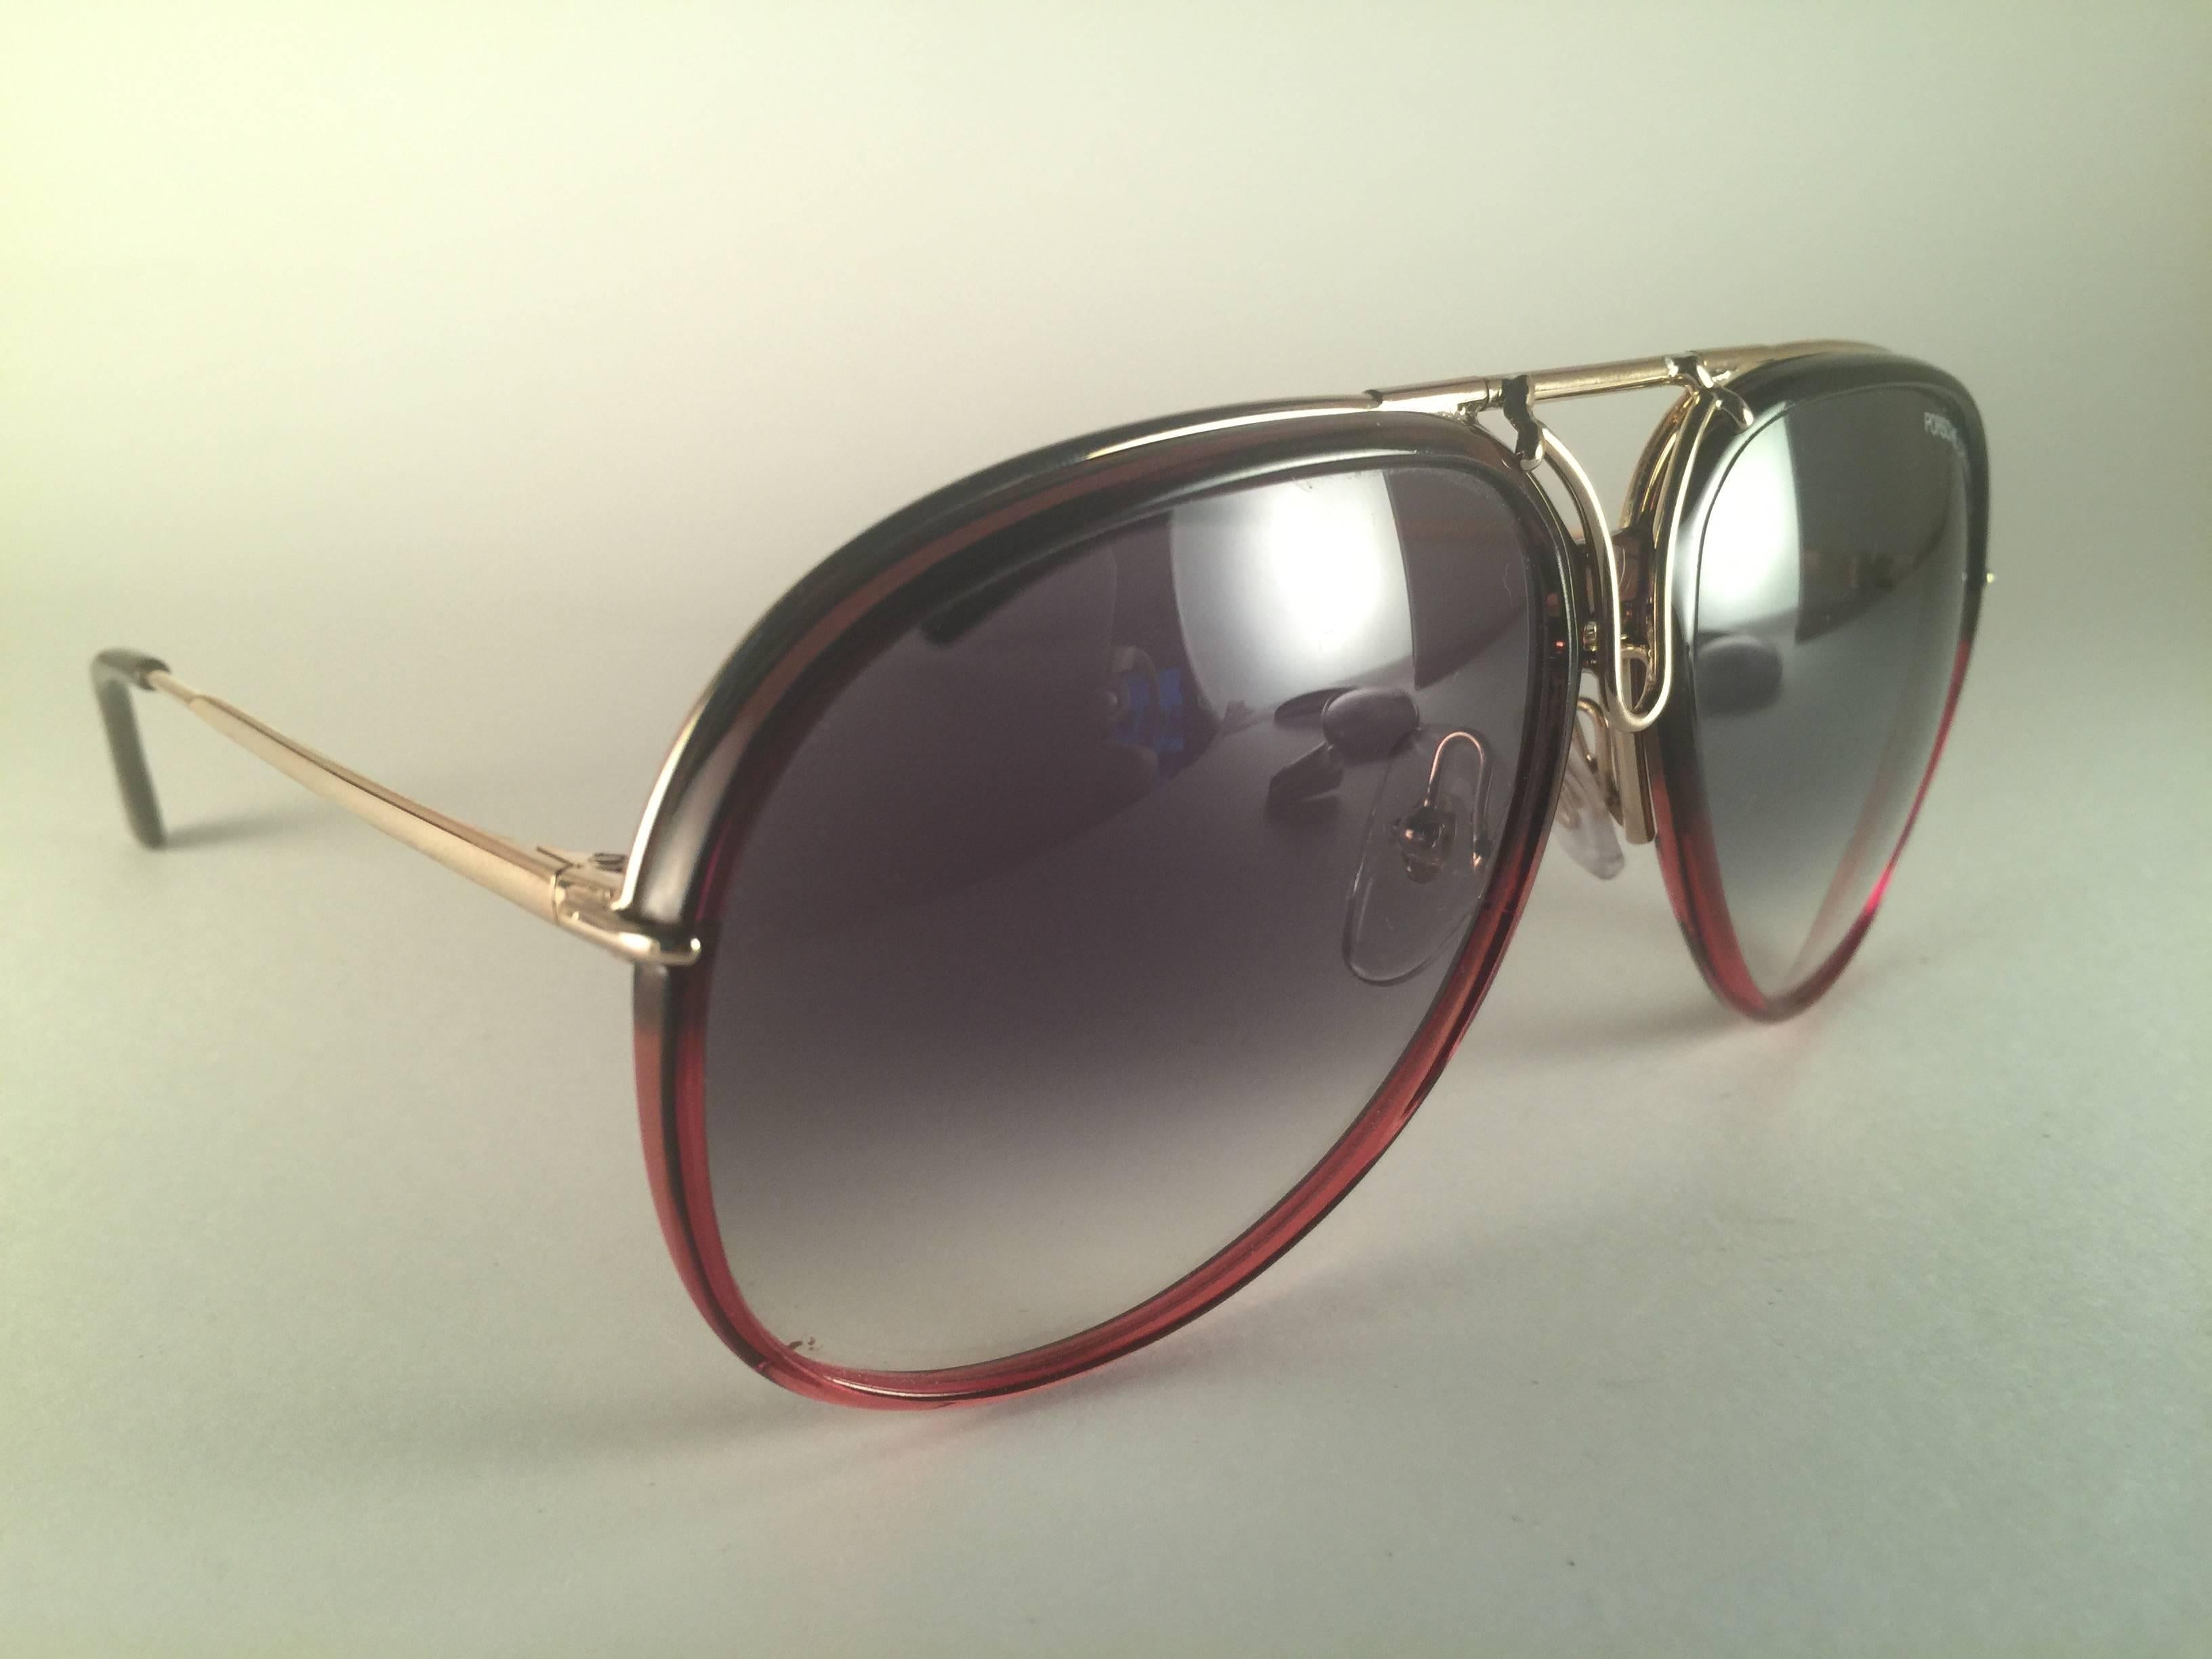 New 1980's Porsche Design 5632 gold frame with interchangeable front, in within seconds it acquire a whole different look. 
Amazing craftsmanship and quality.   
New, never worn. Made in Austria.